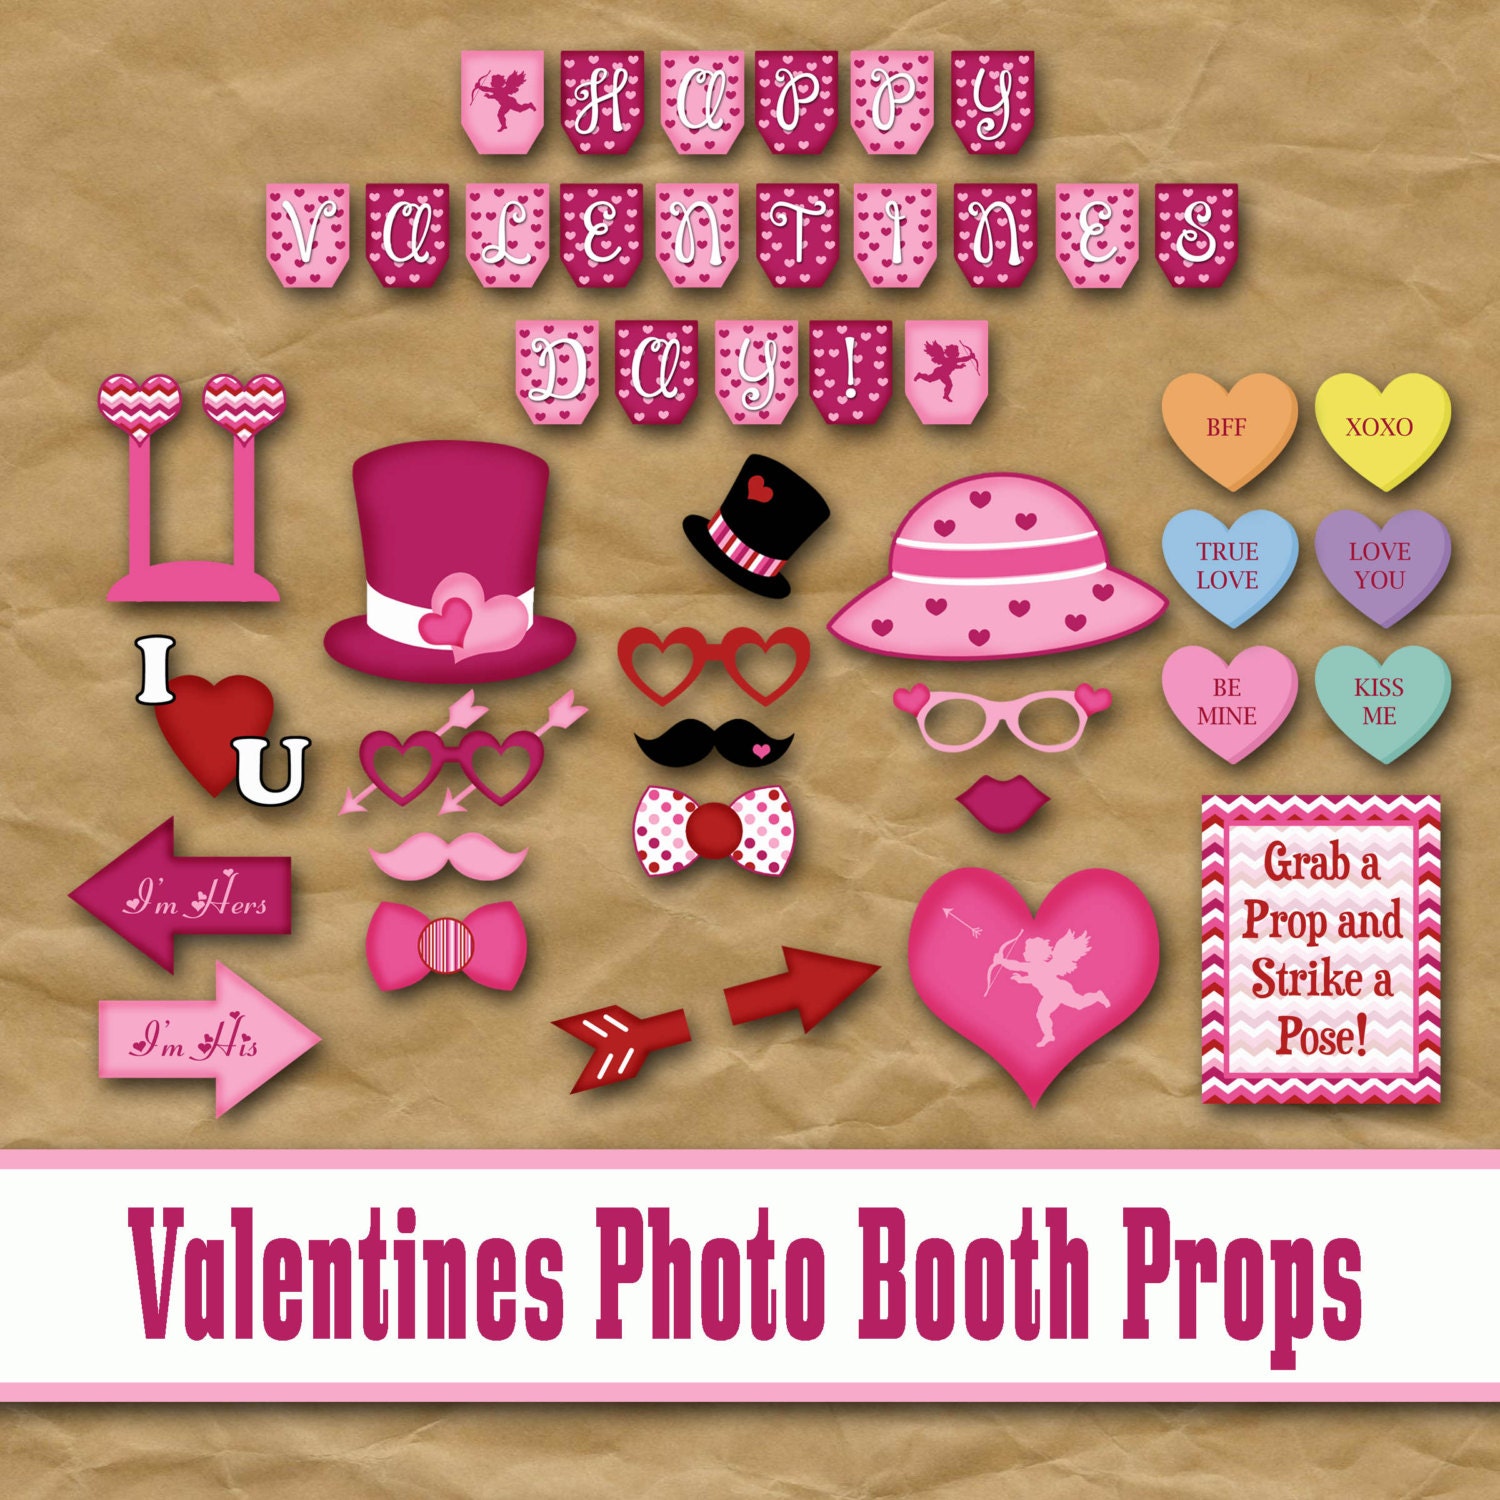 printable-valentines-day-photo-booth-props-and-by-oldmarket